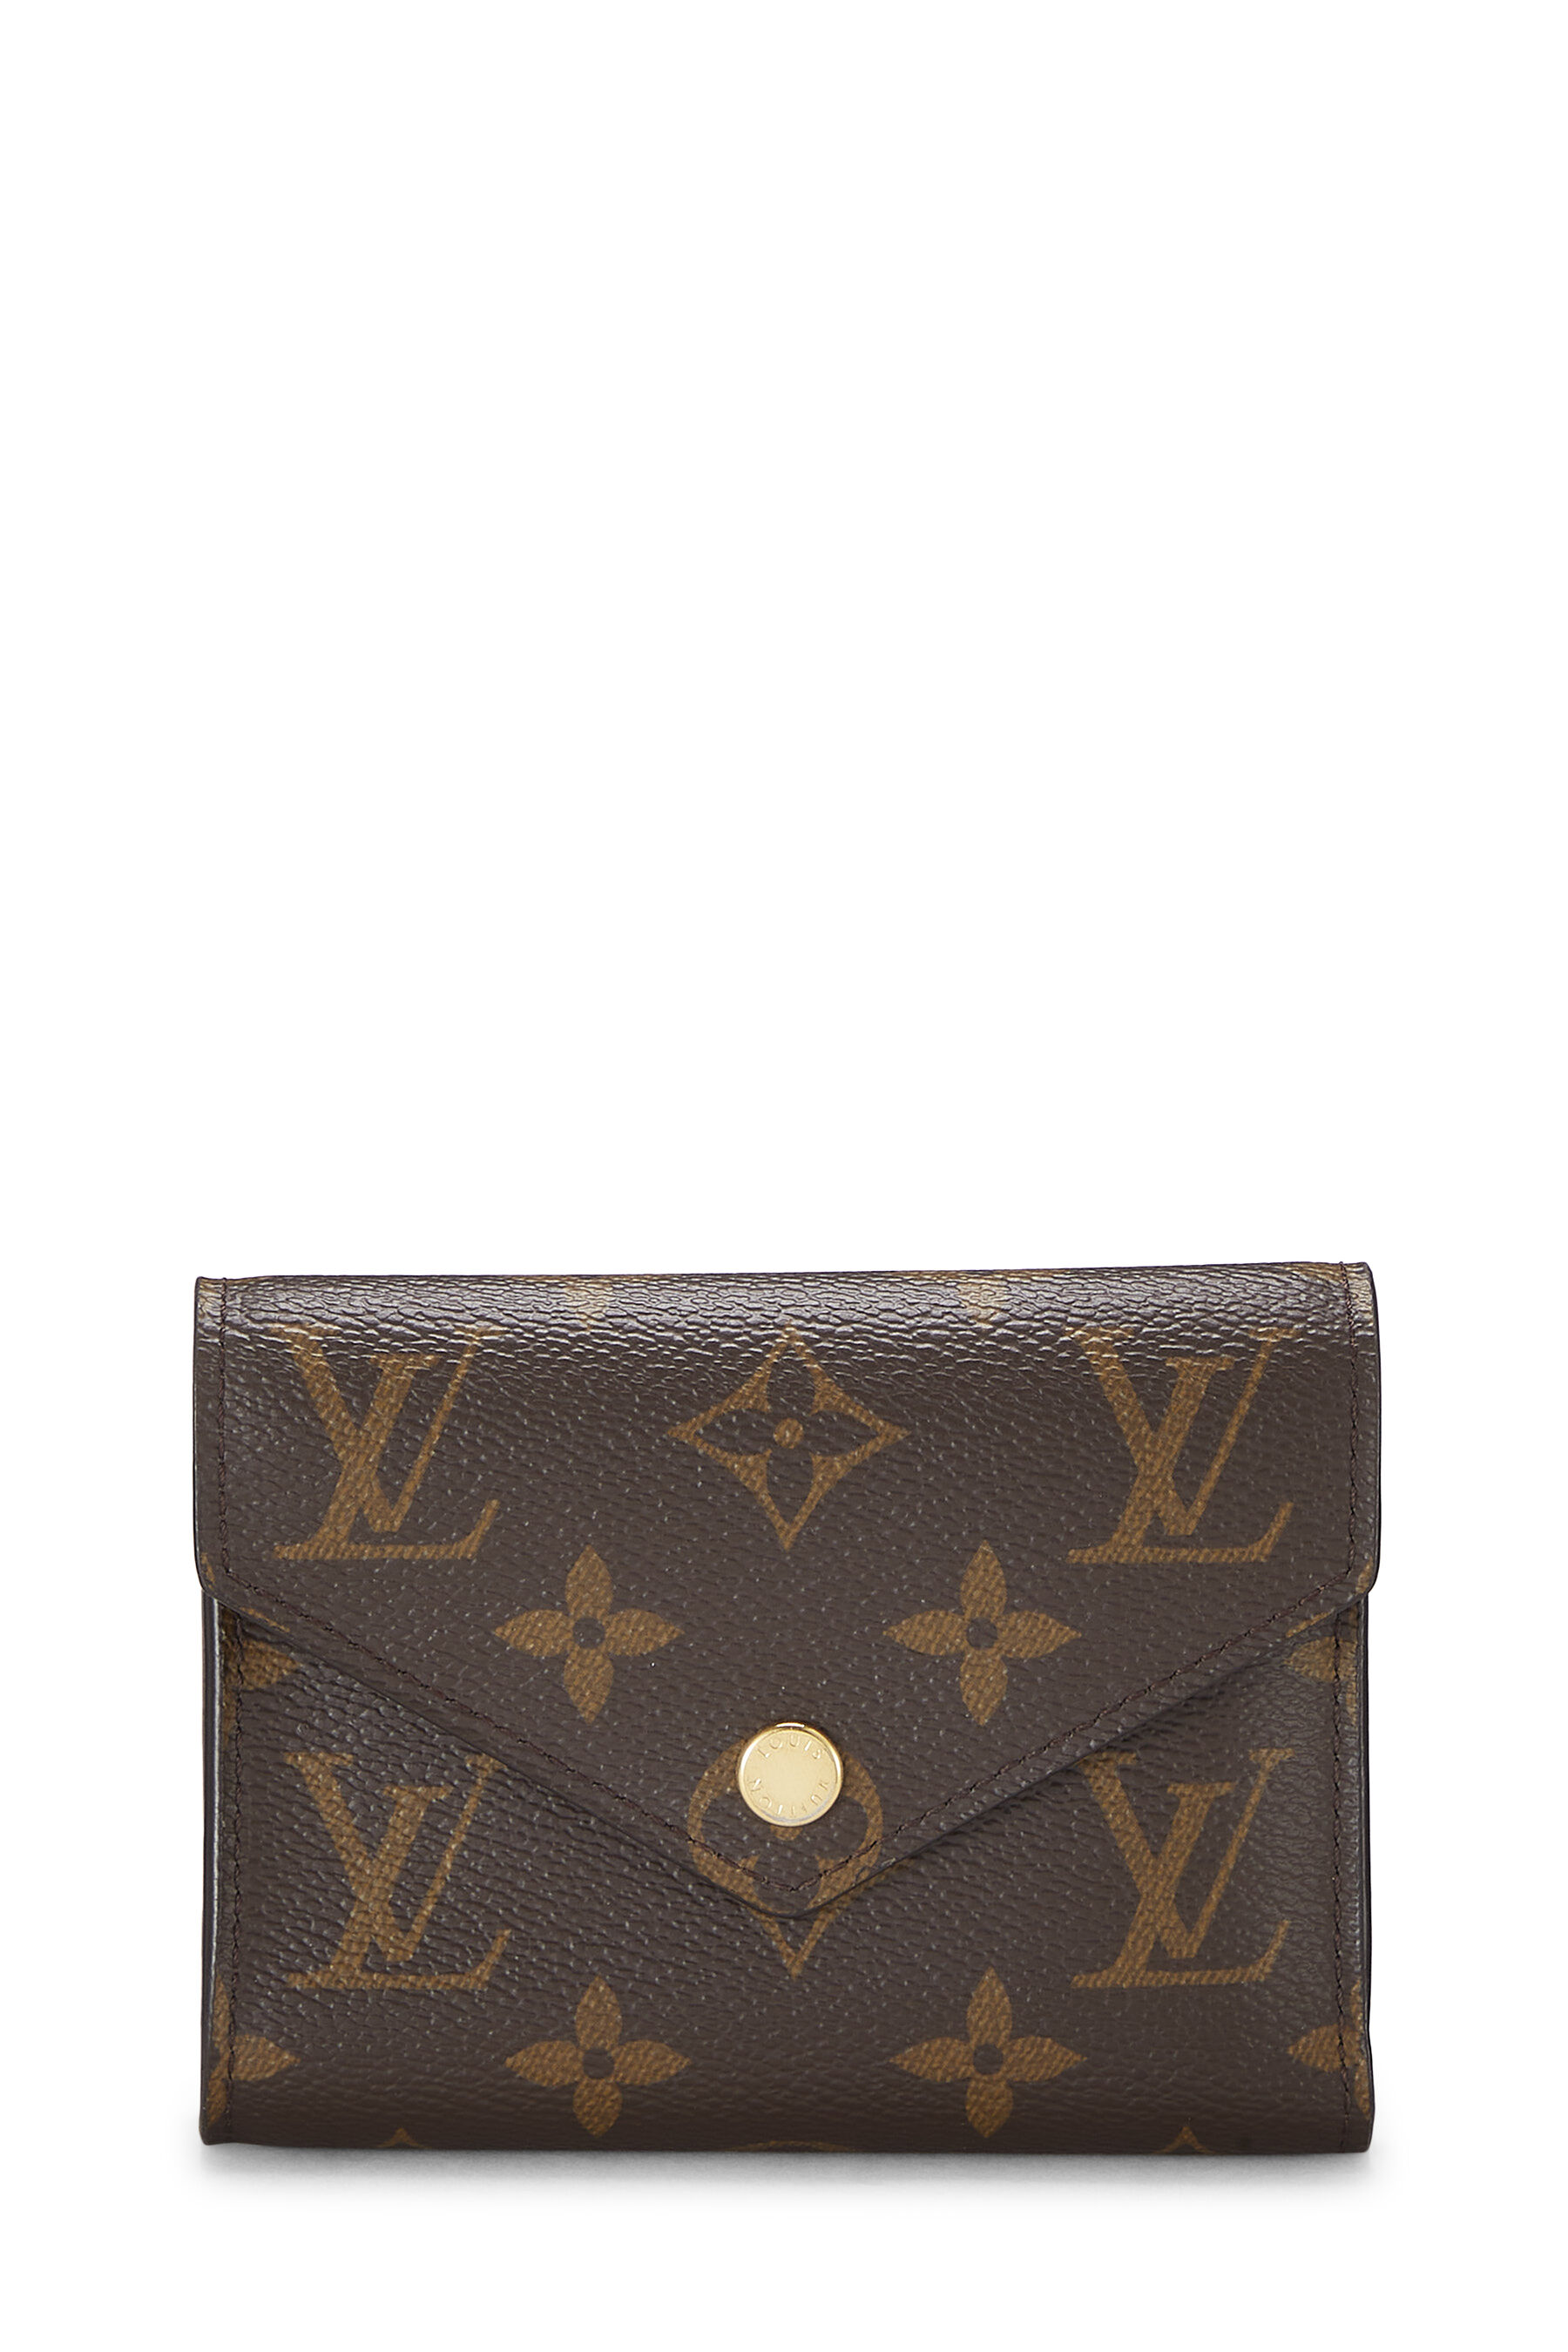 Louis Vuitton Dark Brown Coated Canvas Monogram Fold Over Flap Wallets